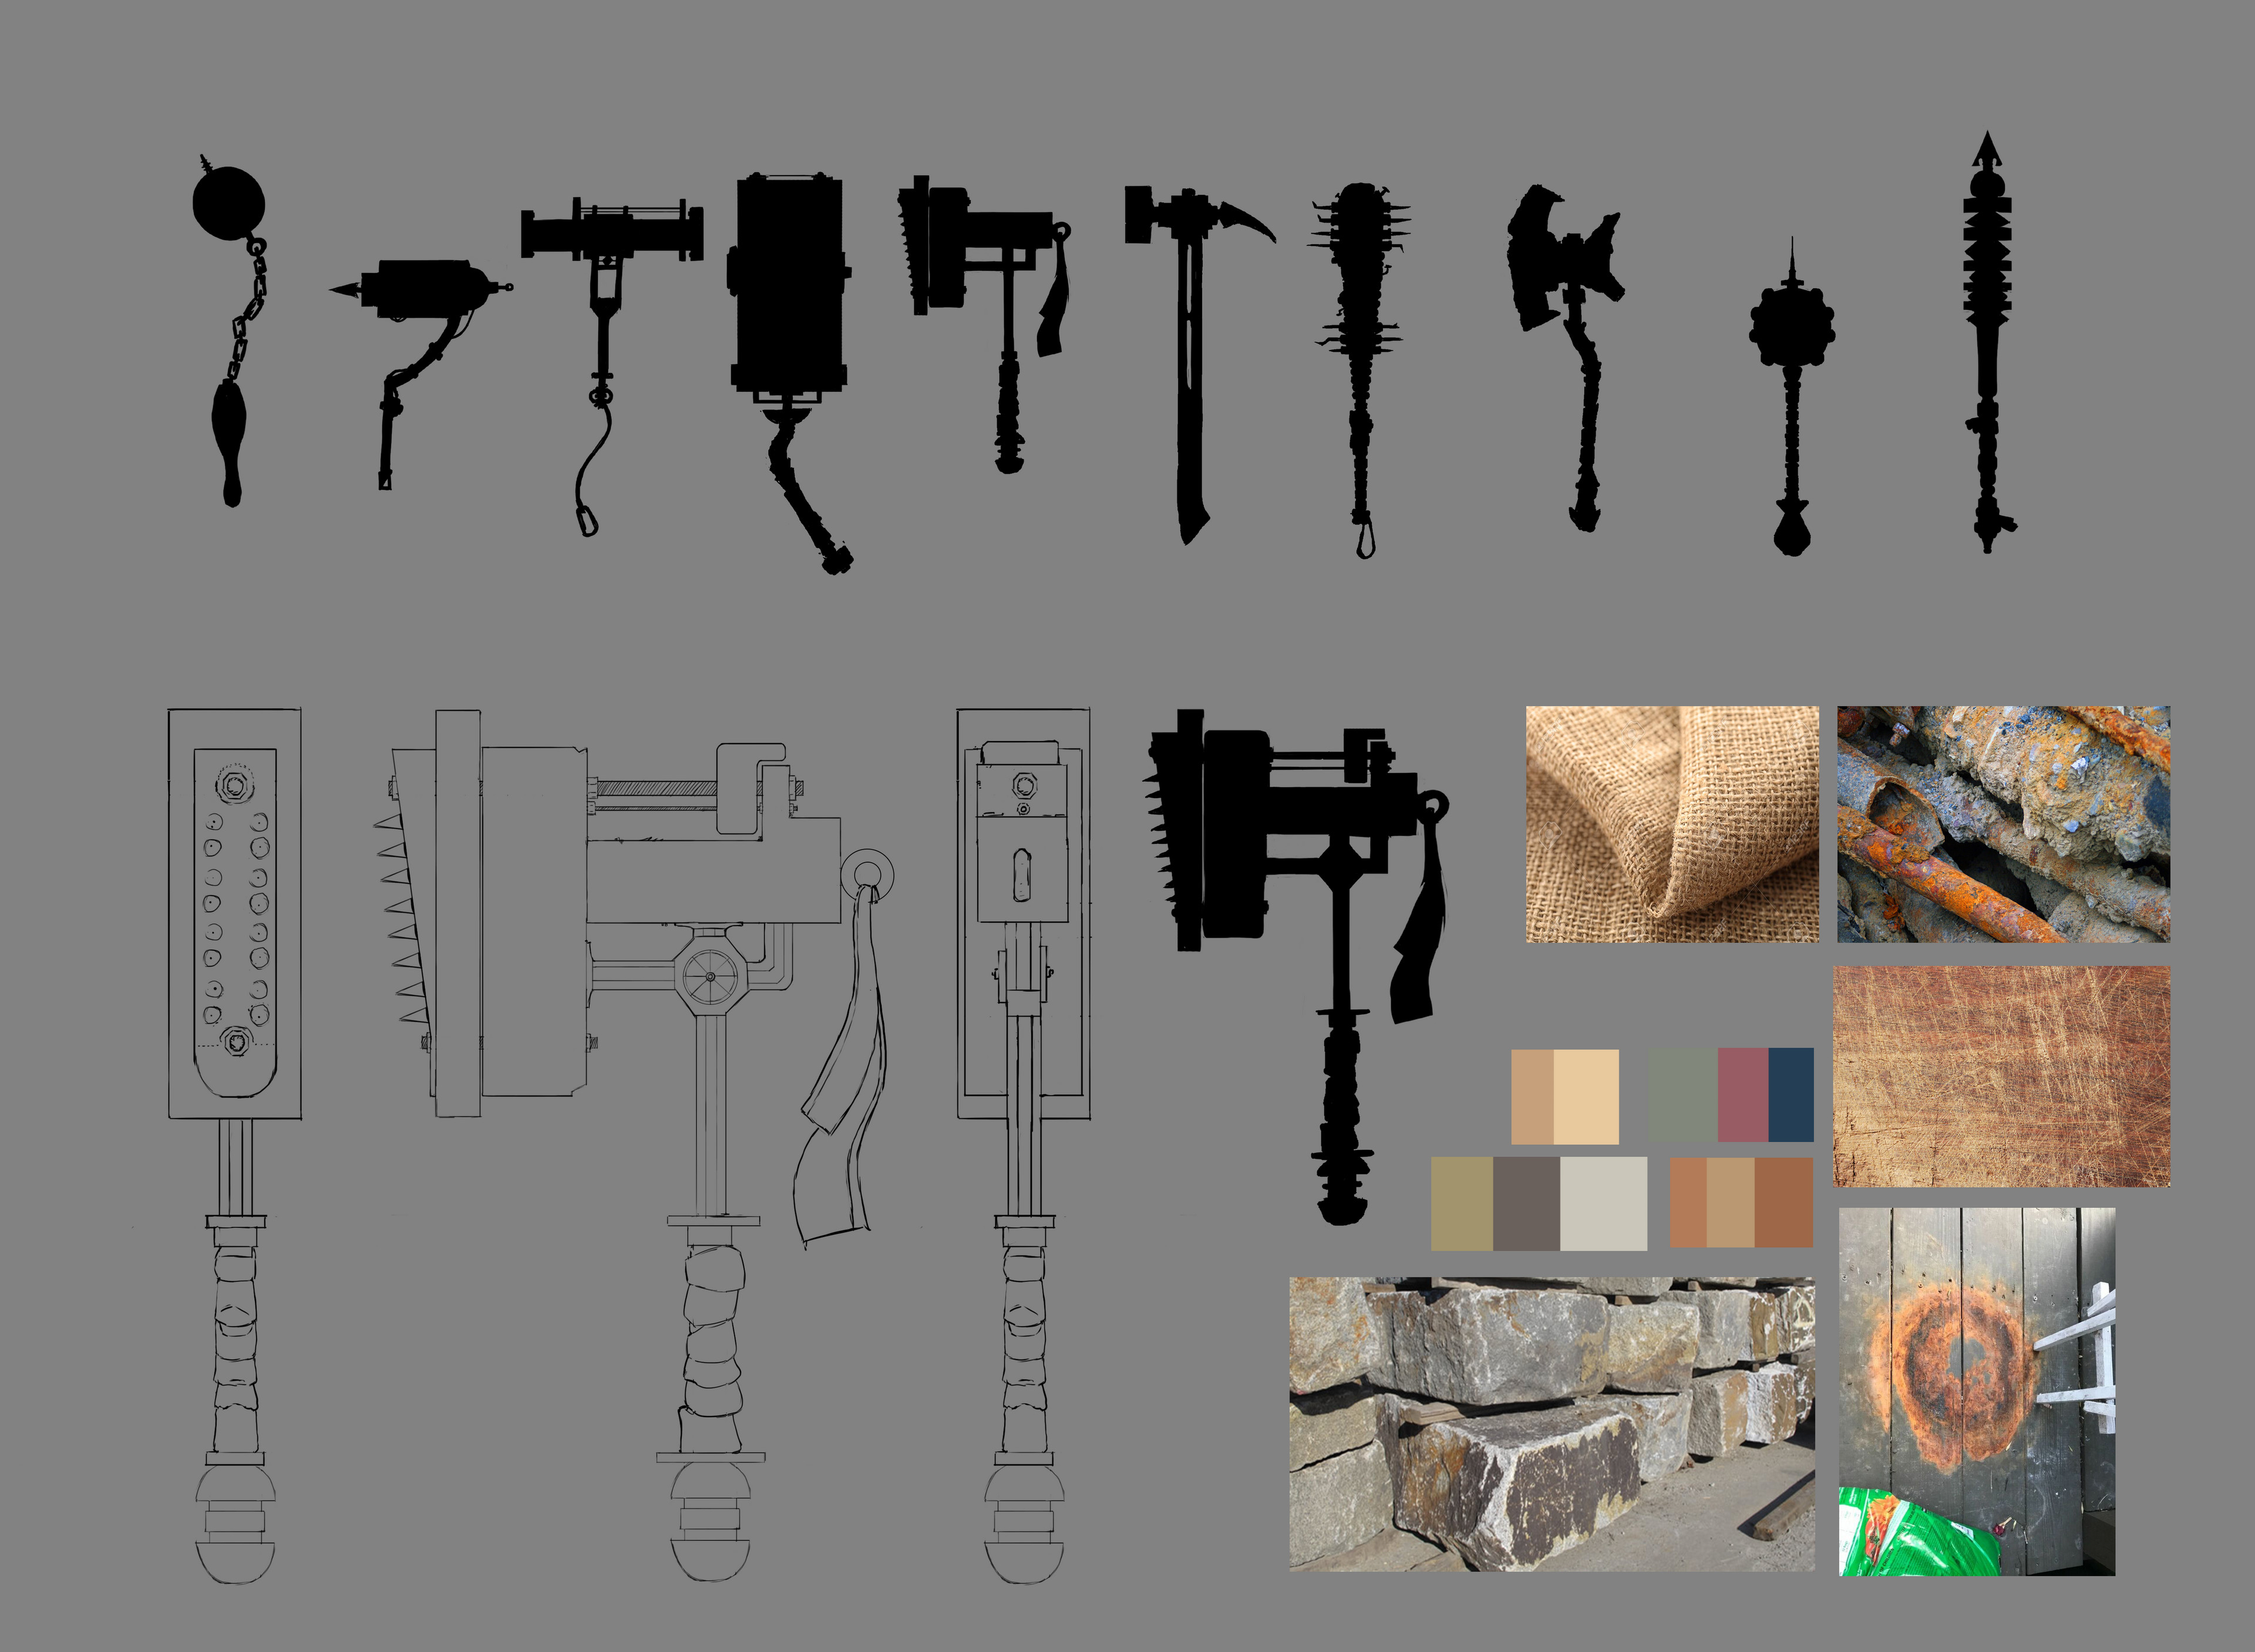 This image is a combination style guide that captures the process of the idea exploration phase and planning phase of the weapons design.